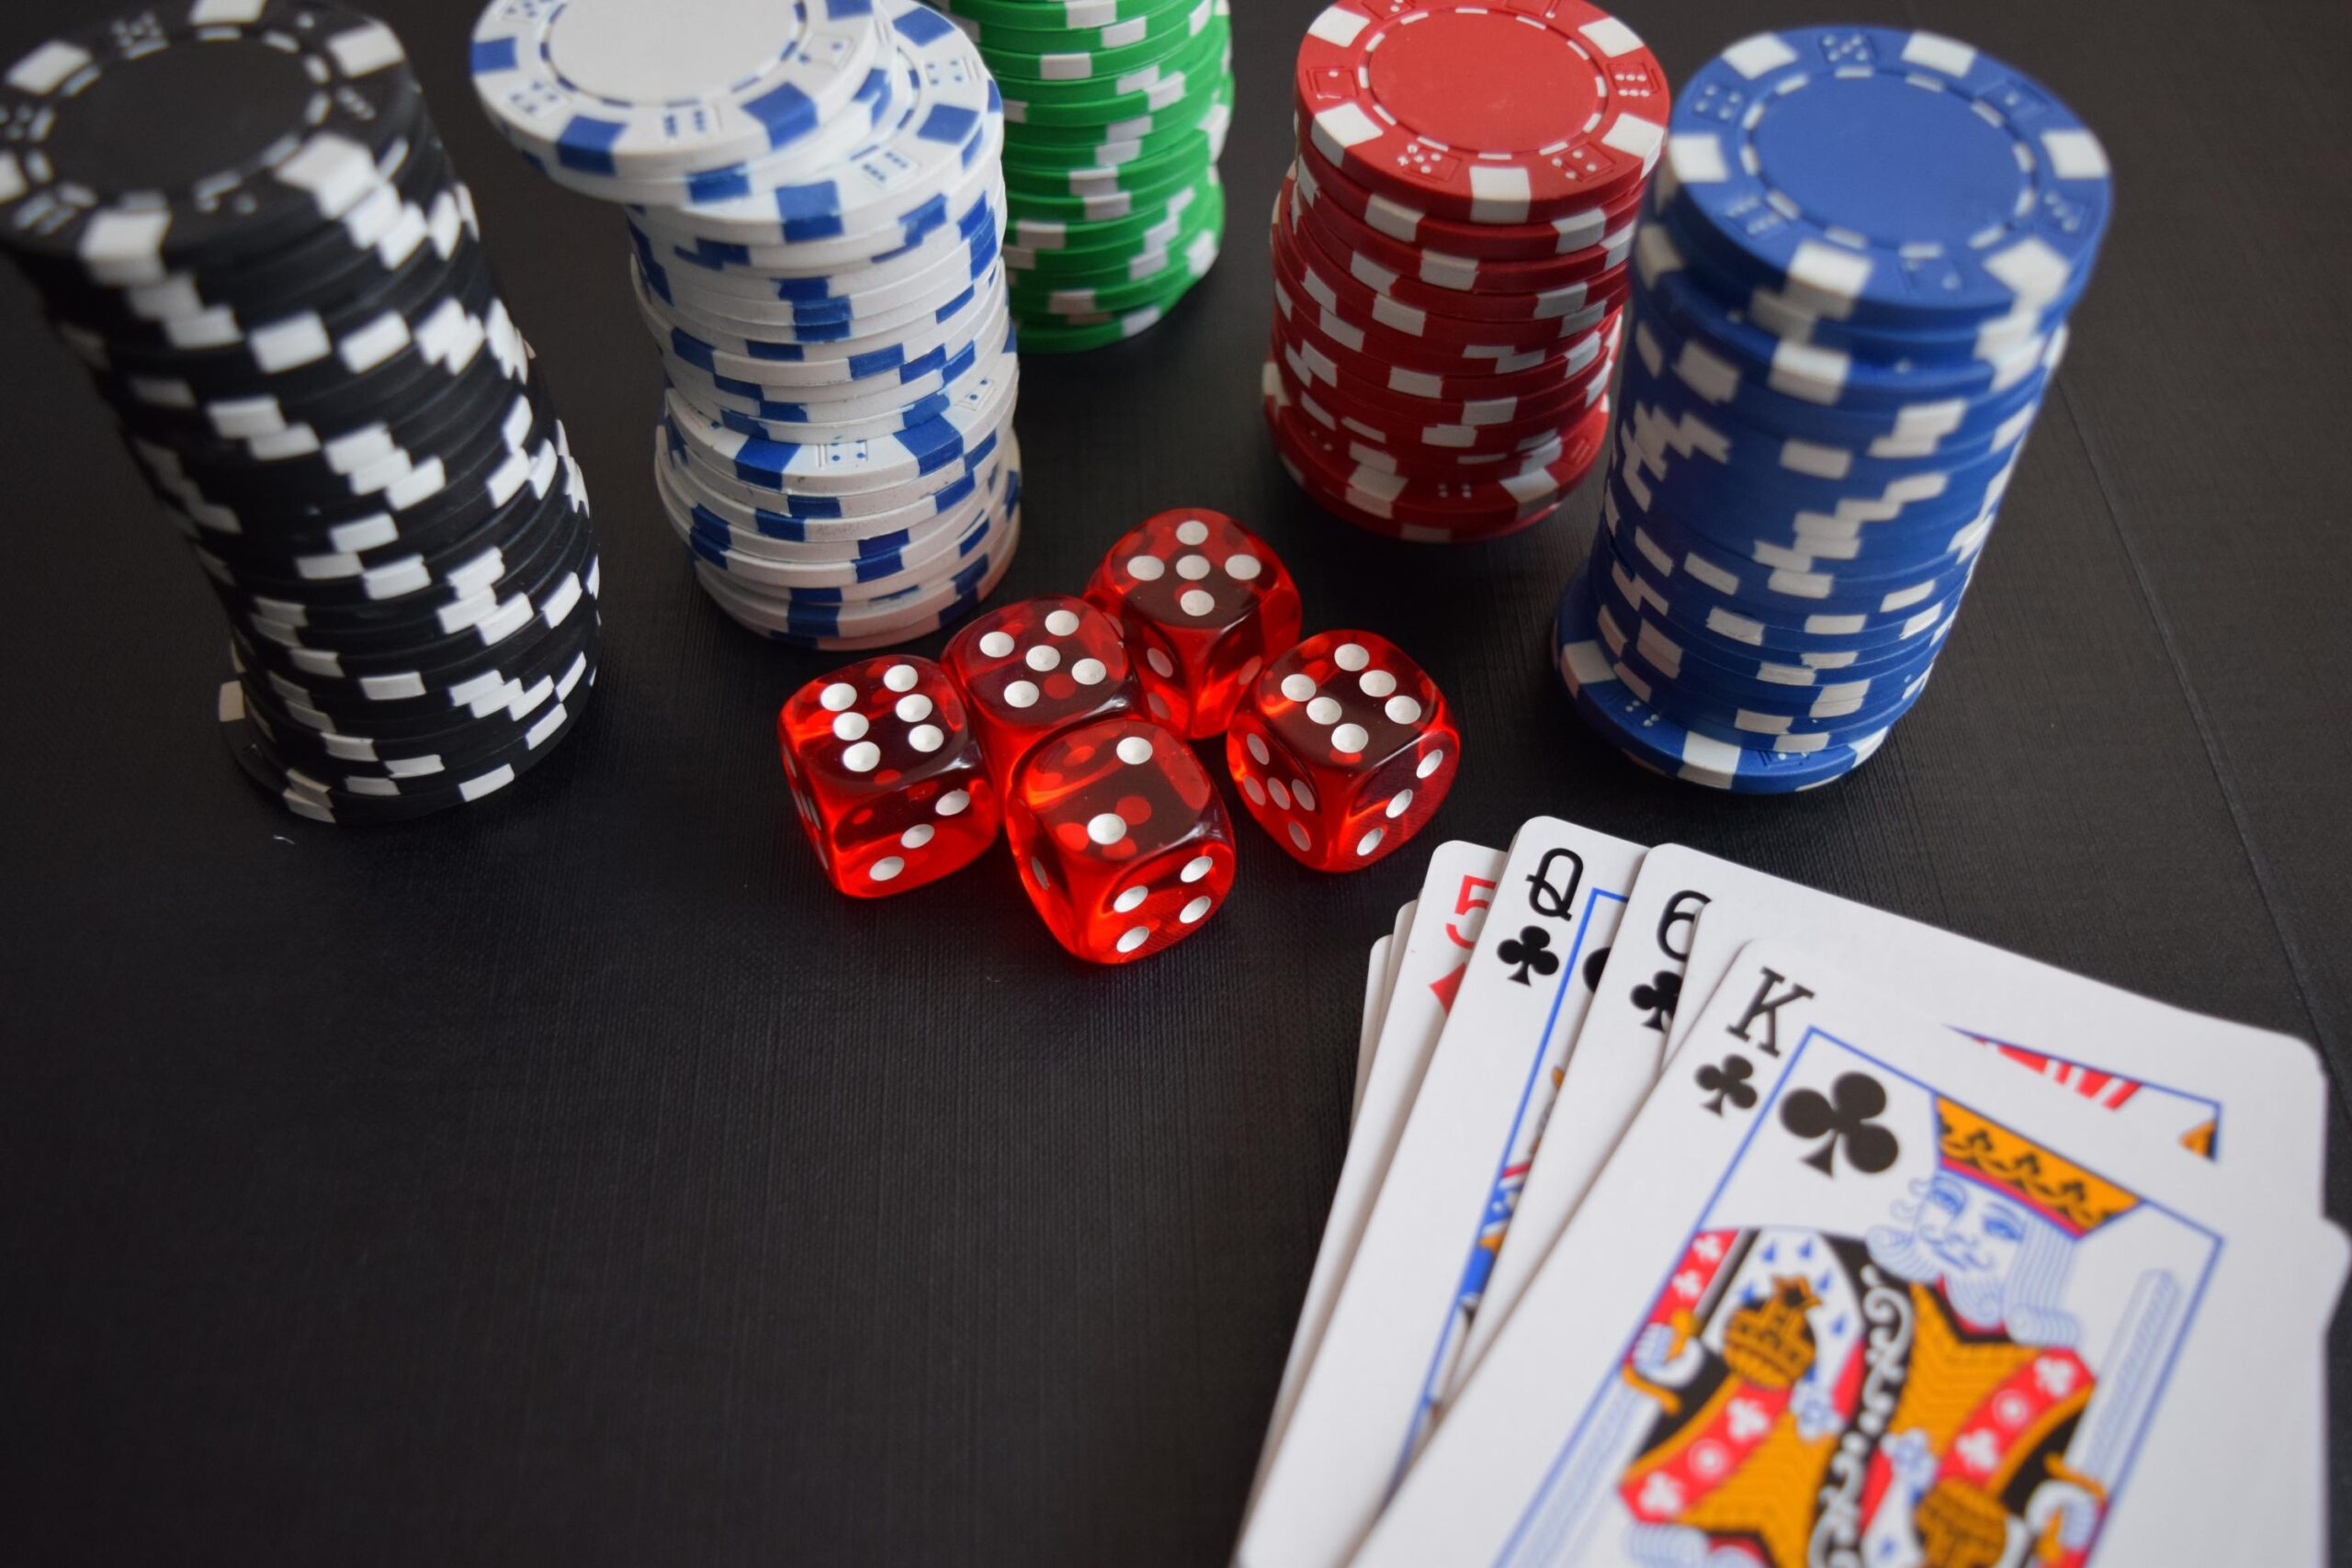 What are the top 10 examples of cross-promotion between casinos and other industries?